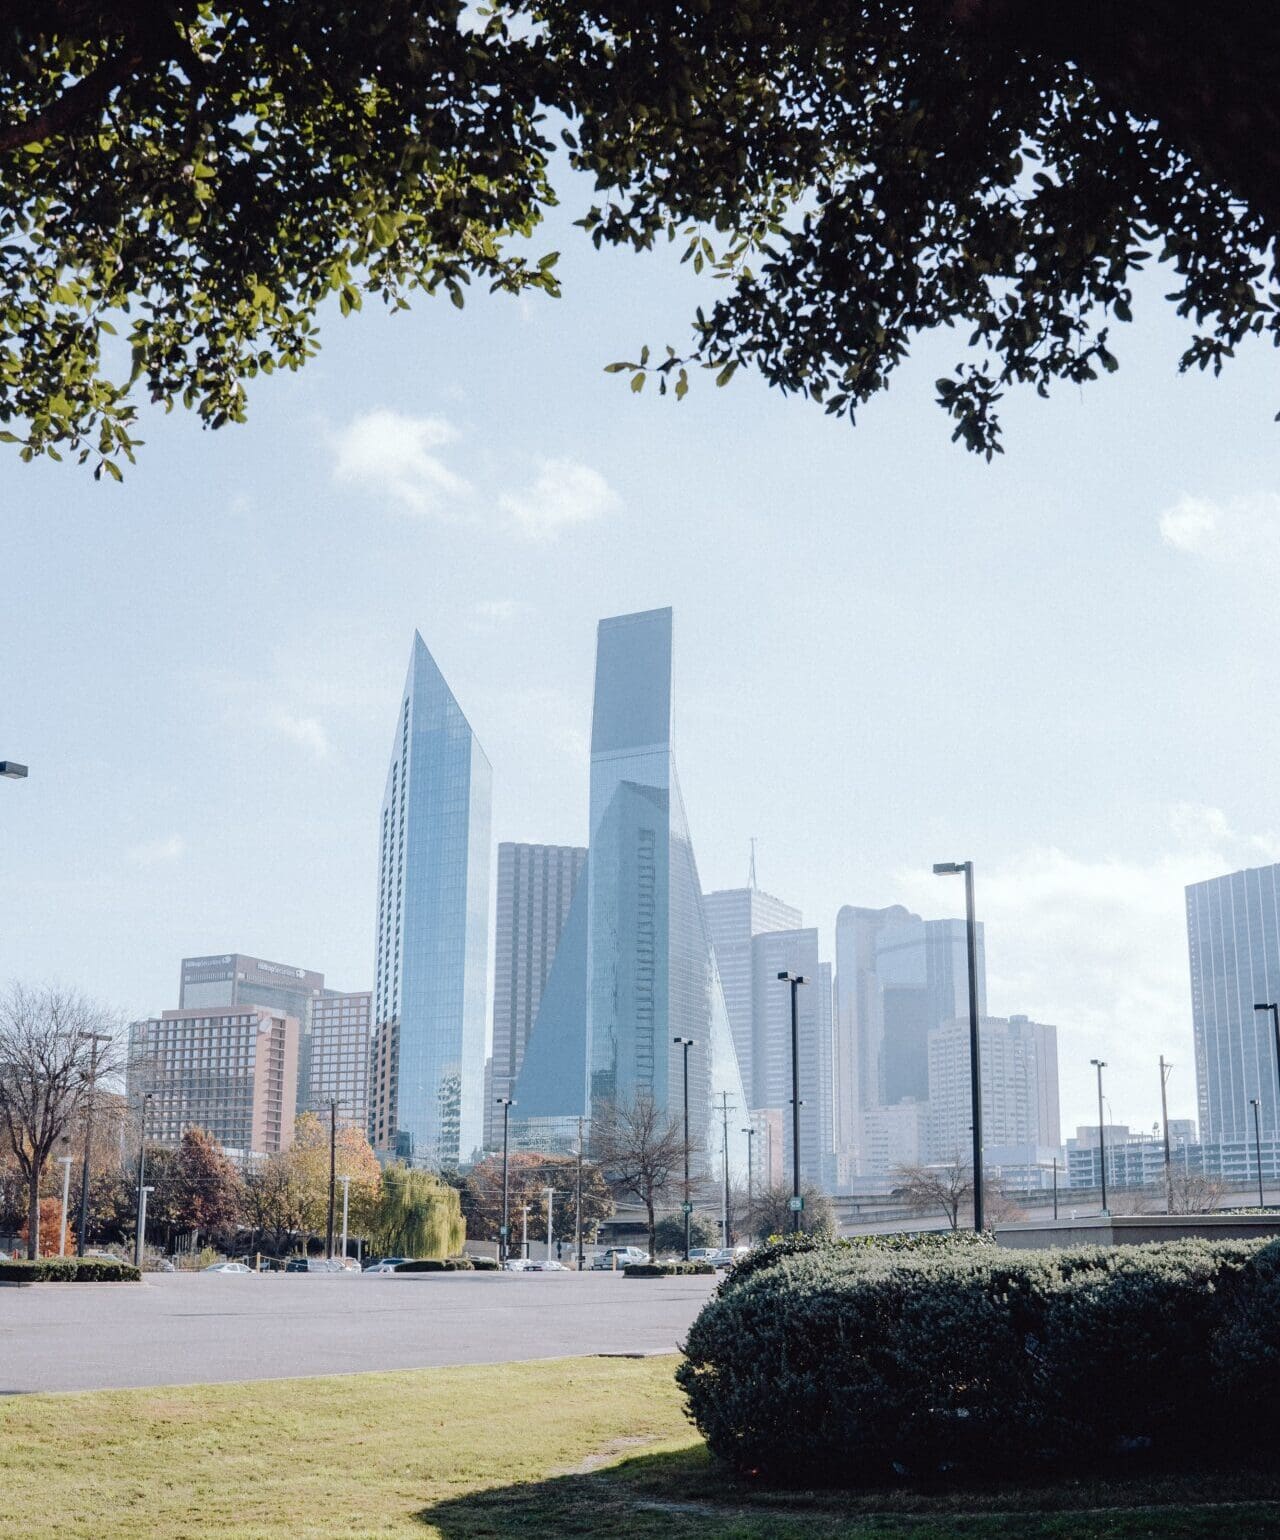 Soaring skyscrapers framed by trees in Dallas, Texas